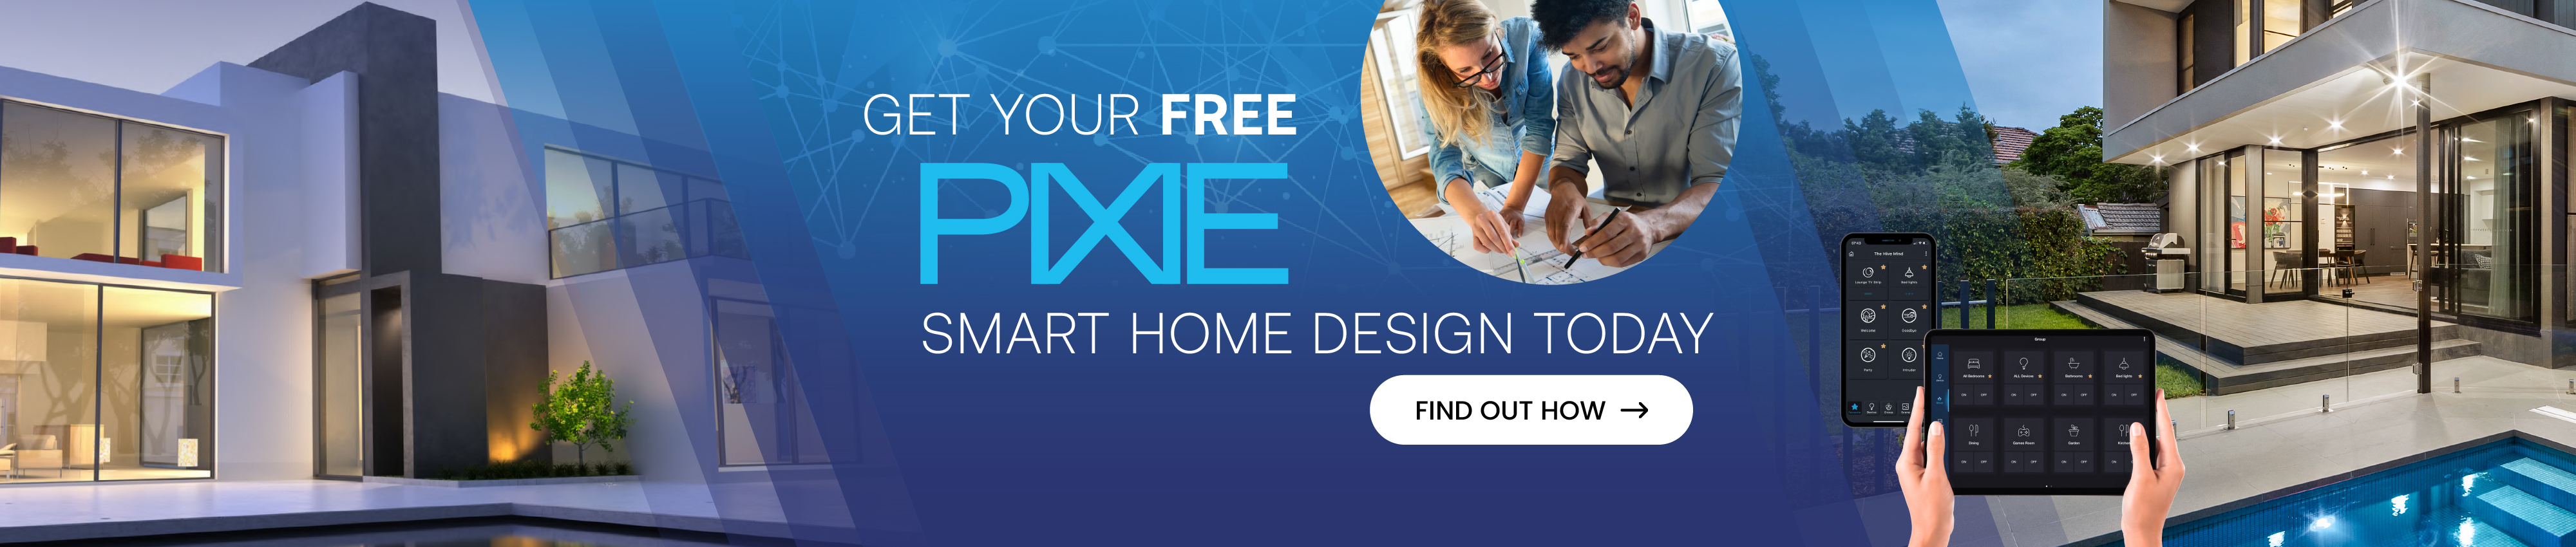 Home Page Banner -Pixie Free Smart Home Design